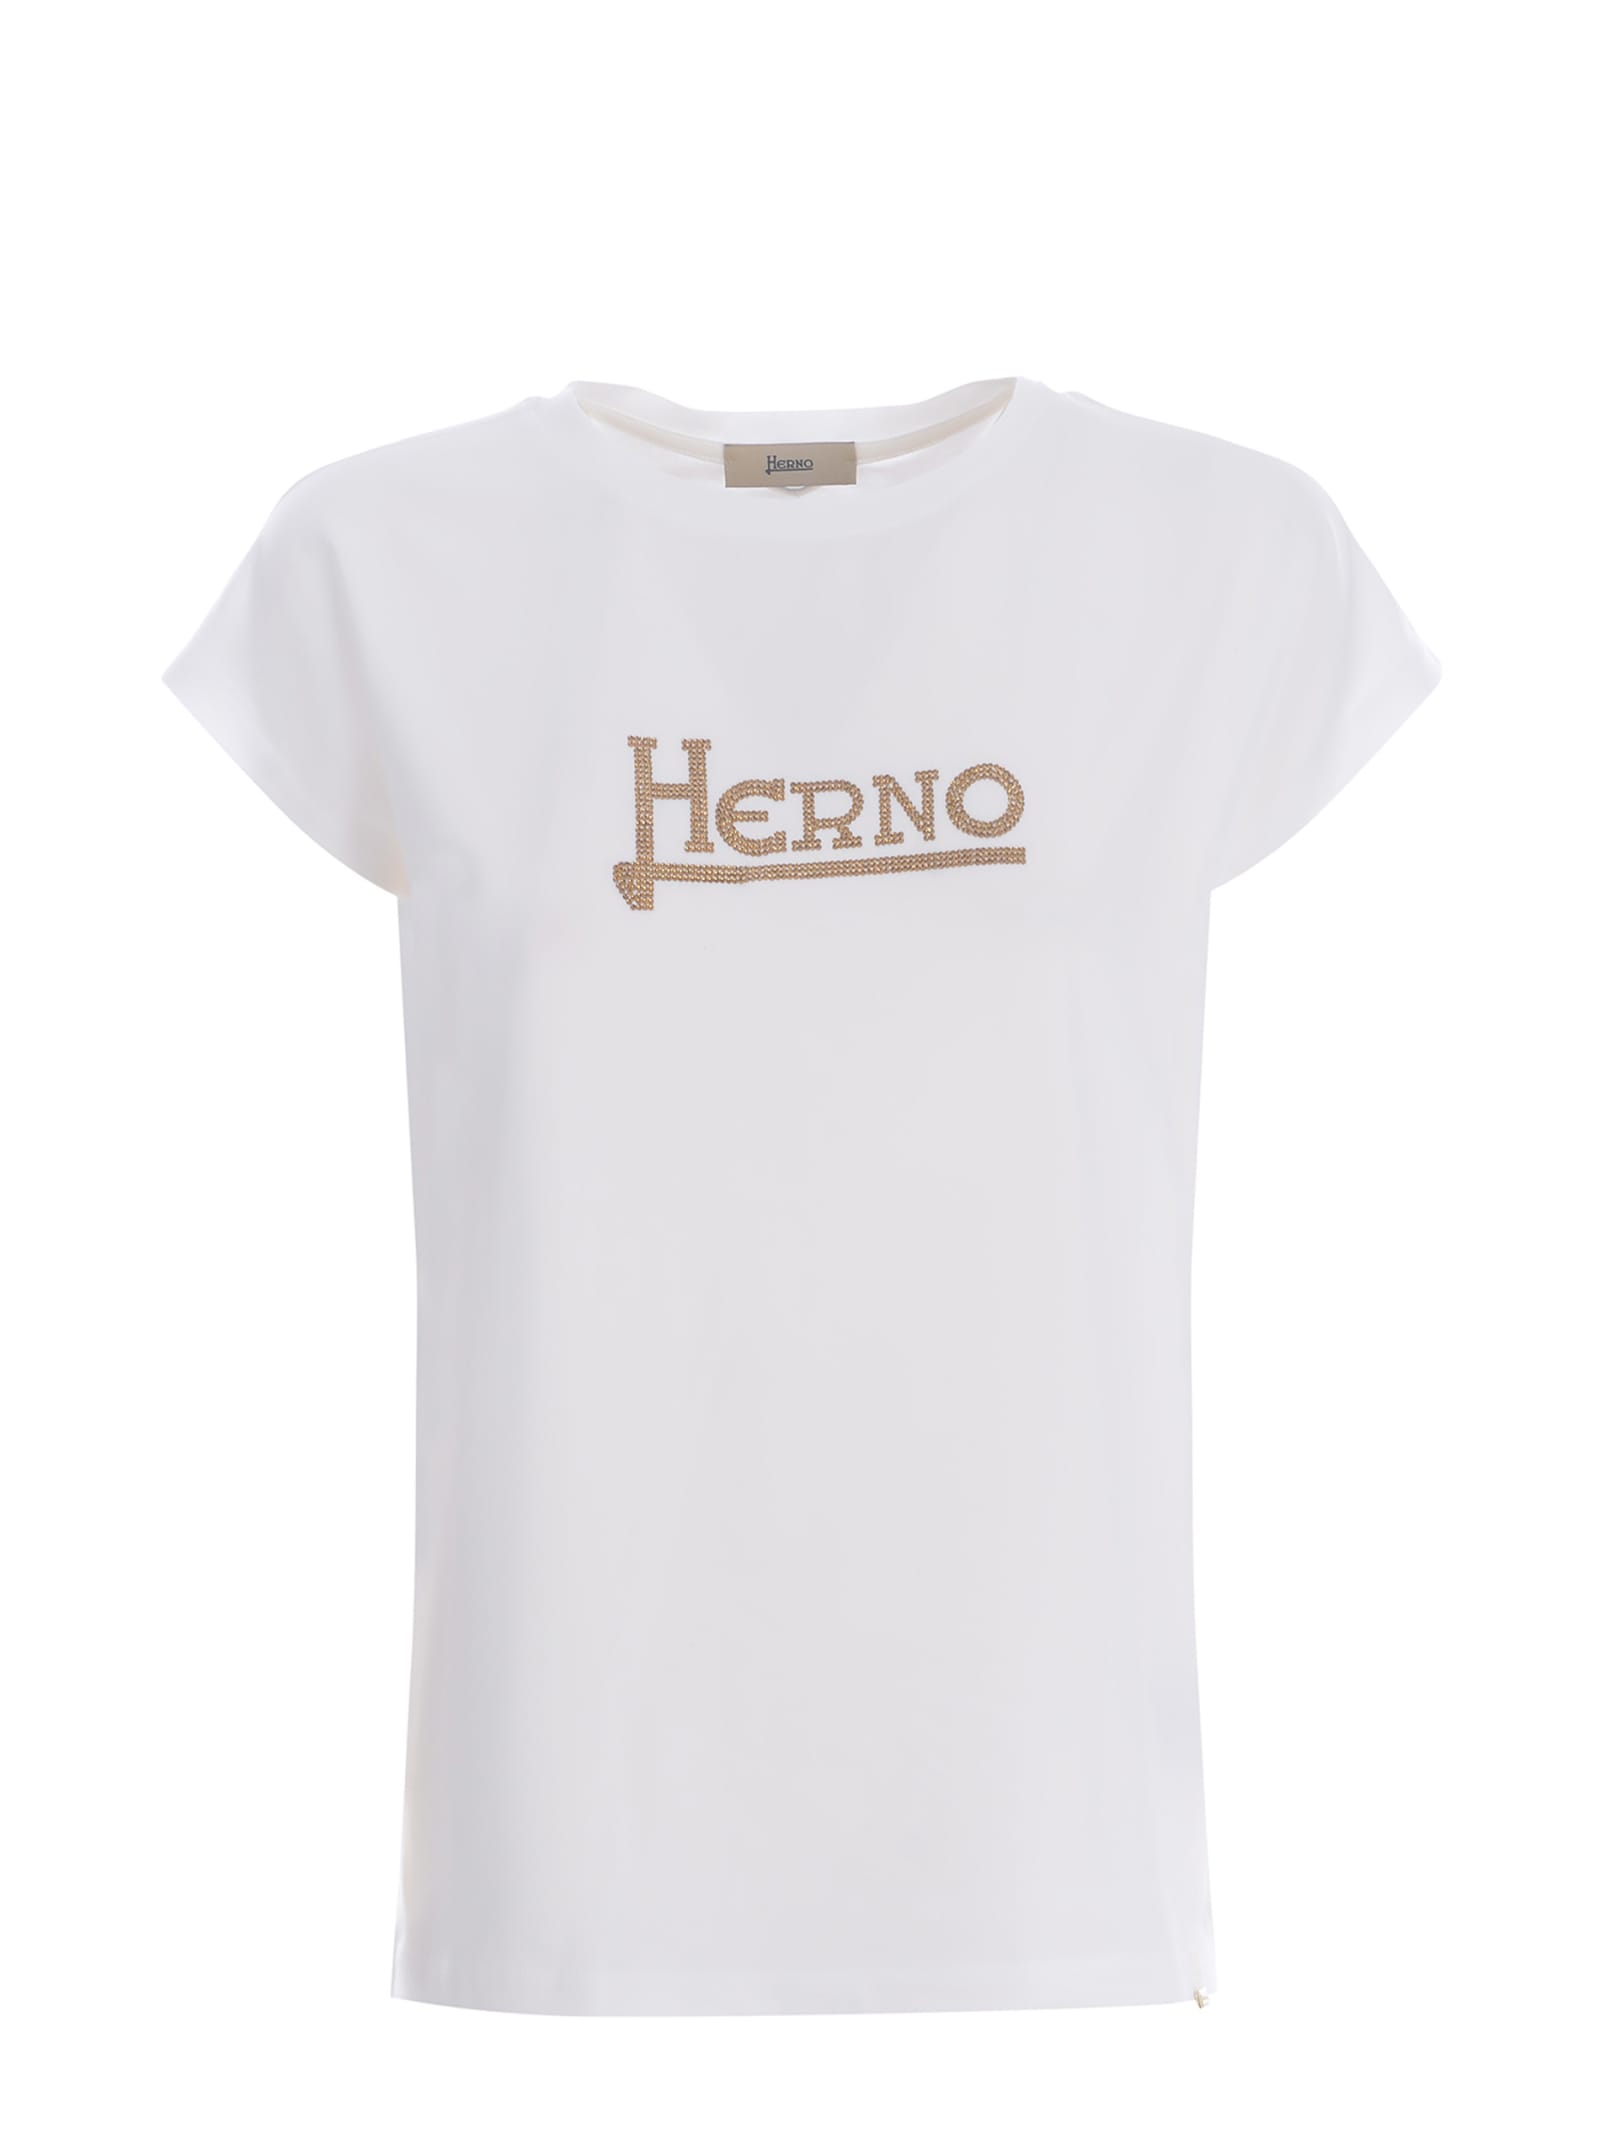 HERNO T-SHIRT HERNO MADE OF COTTON JERSEY